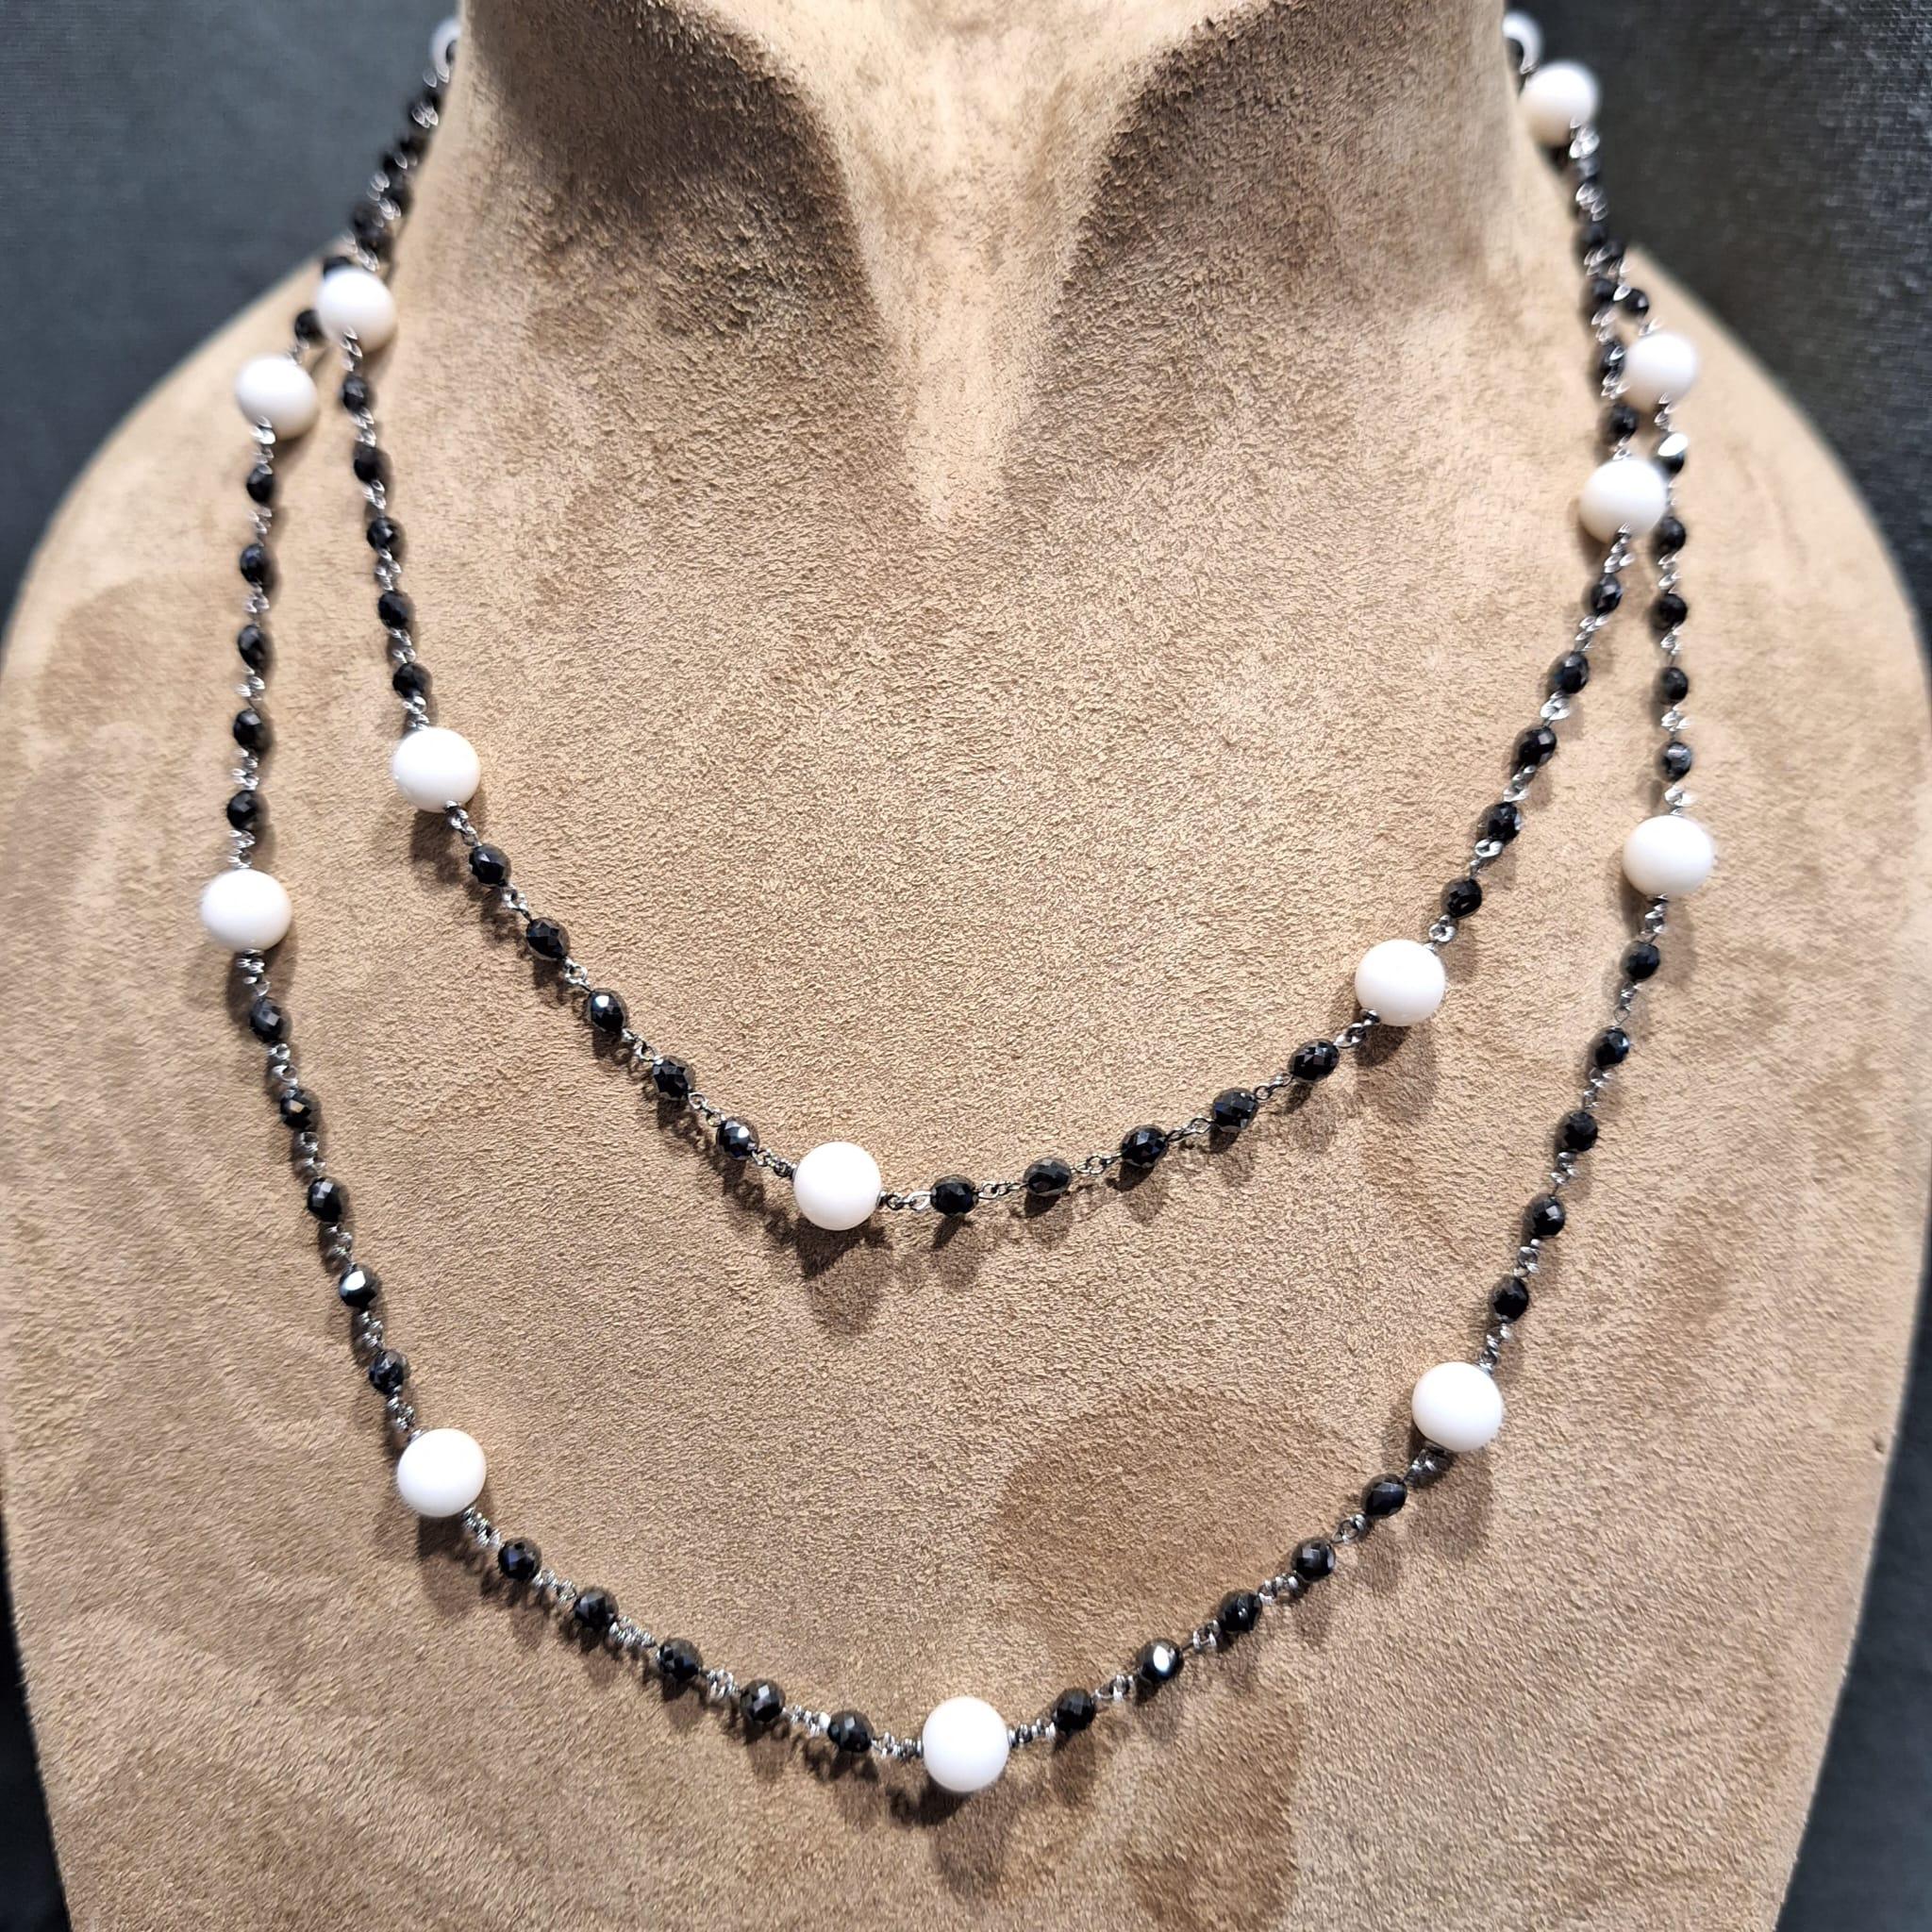 18K White Gold Diamond Necklace with Conch

The necklace setting with conch total weight 39.14ct, the black beads total weight 30.53ct, made in 18K gold.

